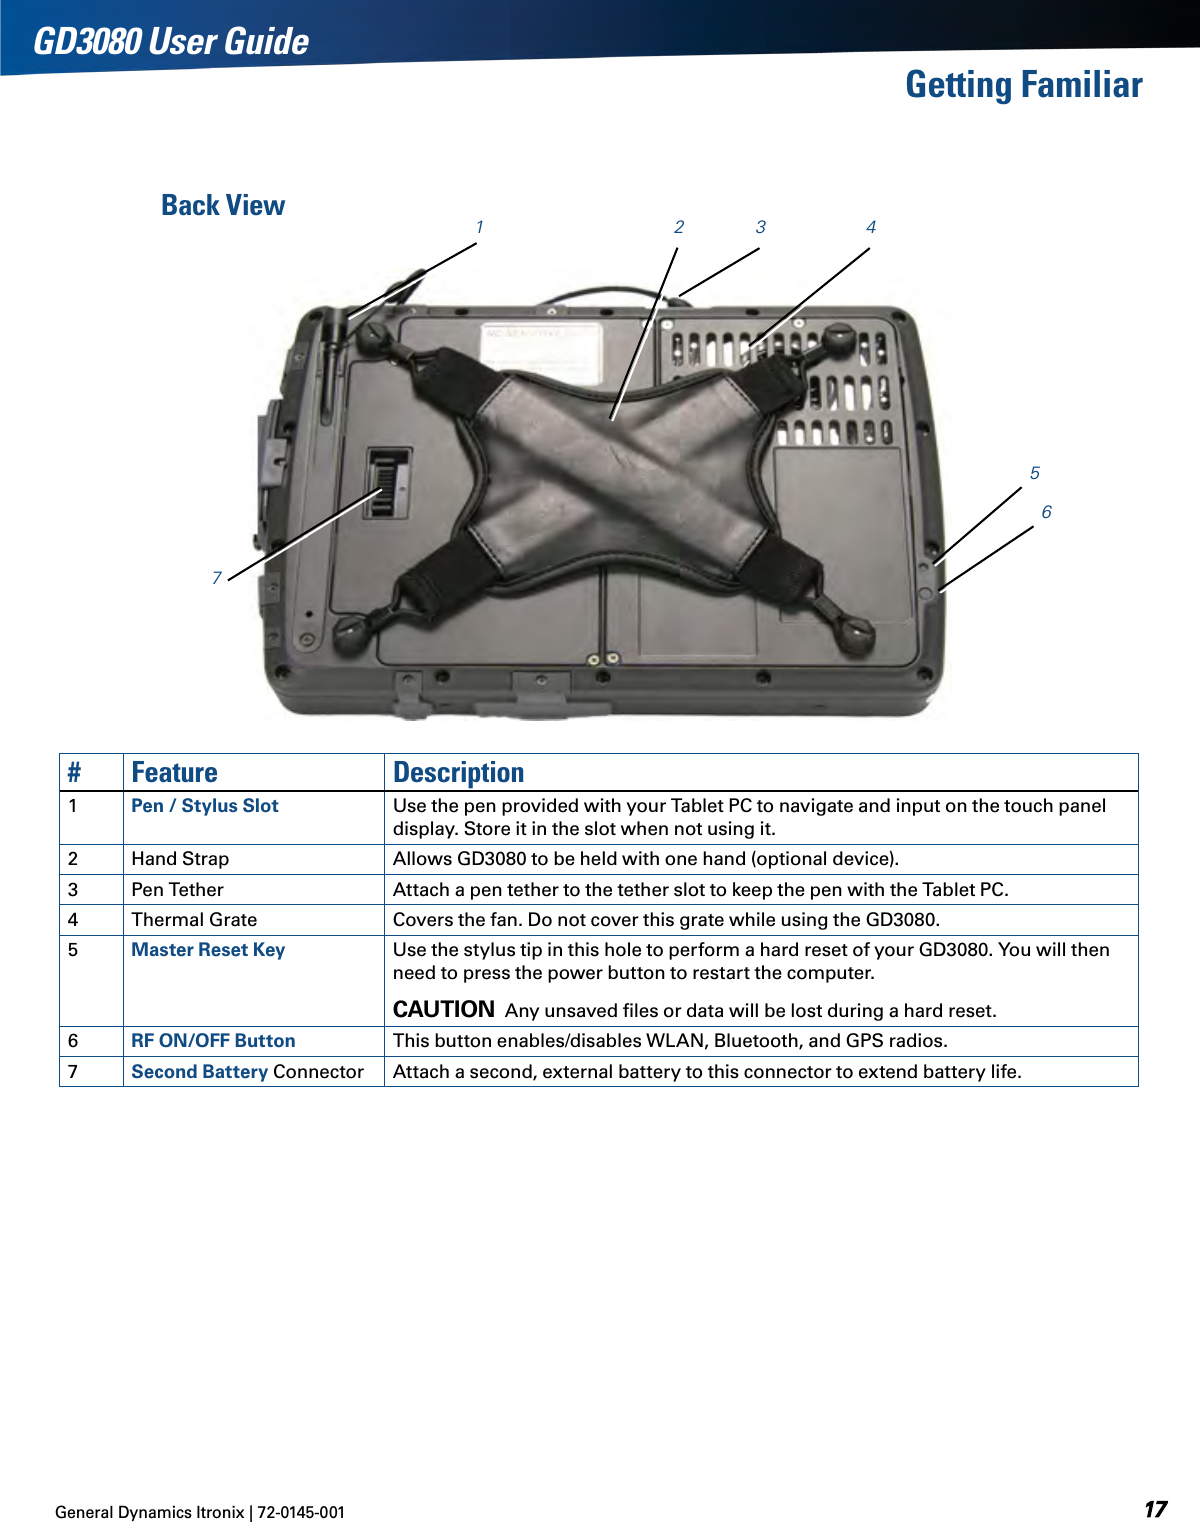 General Dynamics Itronix | 72-0145-001GD3080 User GuideGetting Familiar#Feature Description1Pen / Stylus Slot Use the pen provided with your Tablet PC to navigate and input on the touch panel display. Store it in the slot when not using it.2Hand Strap Allows GD3080 to be held with one hand (optional device). 3Pen Tether Attach a pen tether to the tether slot to keep the pen with the Tablet PC.4Thermal Grate Covers the fan. Do not cover this grate while using the GD3080.5Master Reset Key Use the stylus tip in this hole to perform a hard reset of your GD3080. You will then need to press the power button to restart the computer.Caution  Any unsaved ﬁles or data will be lost during a hard reset.6RF ON/OFF Button This button enables/disables WLAN, Bluetooth, and GPS radios.7Second Battery Connector Attach a second, external battery to this connector to extend battery life.2 3 41Back View567